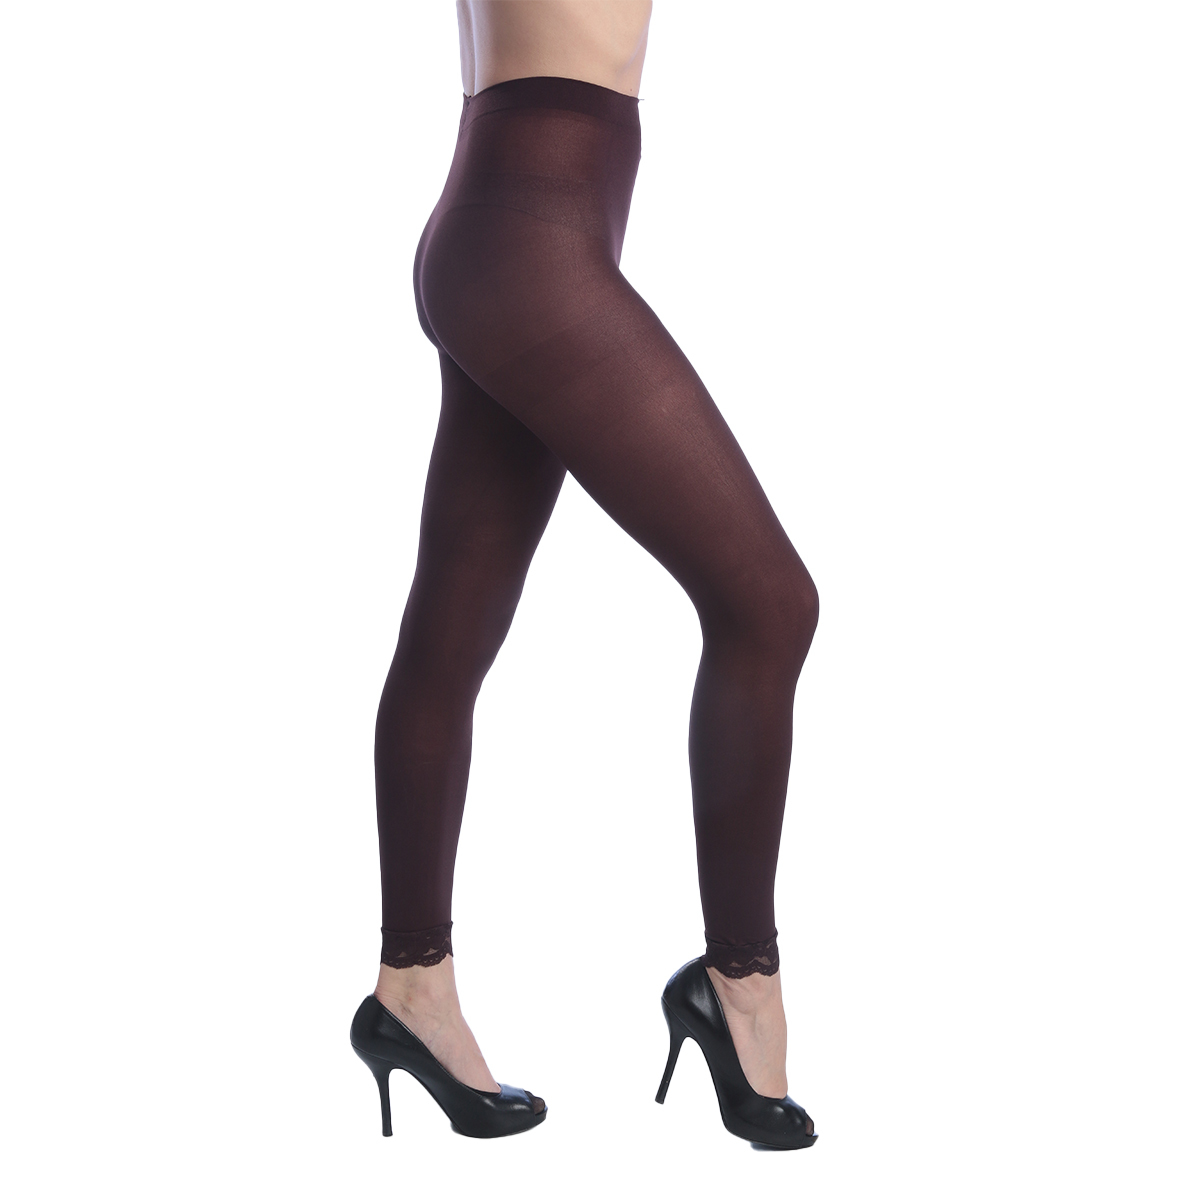 Bulk Women's Opaque Footless Lace Tights, Brown, One Size - DollarDays